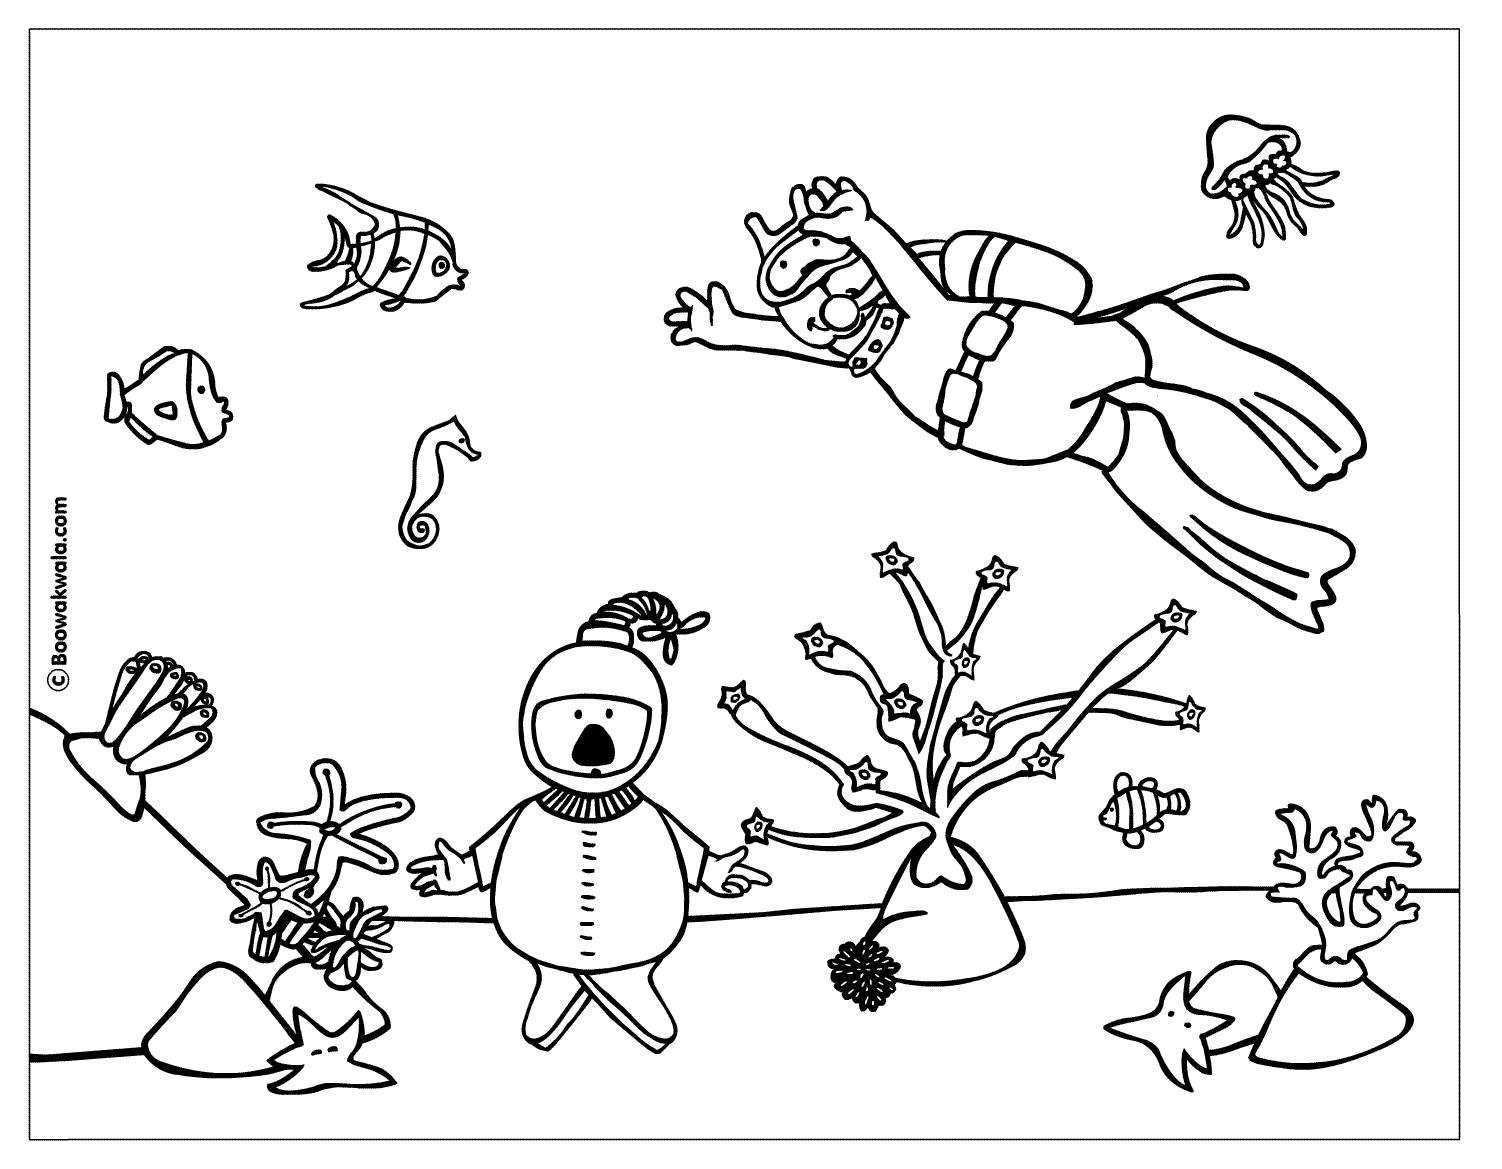 Coral Reef Coloring Pages (18 Pictures) - Colorine.net | 15333